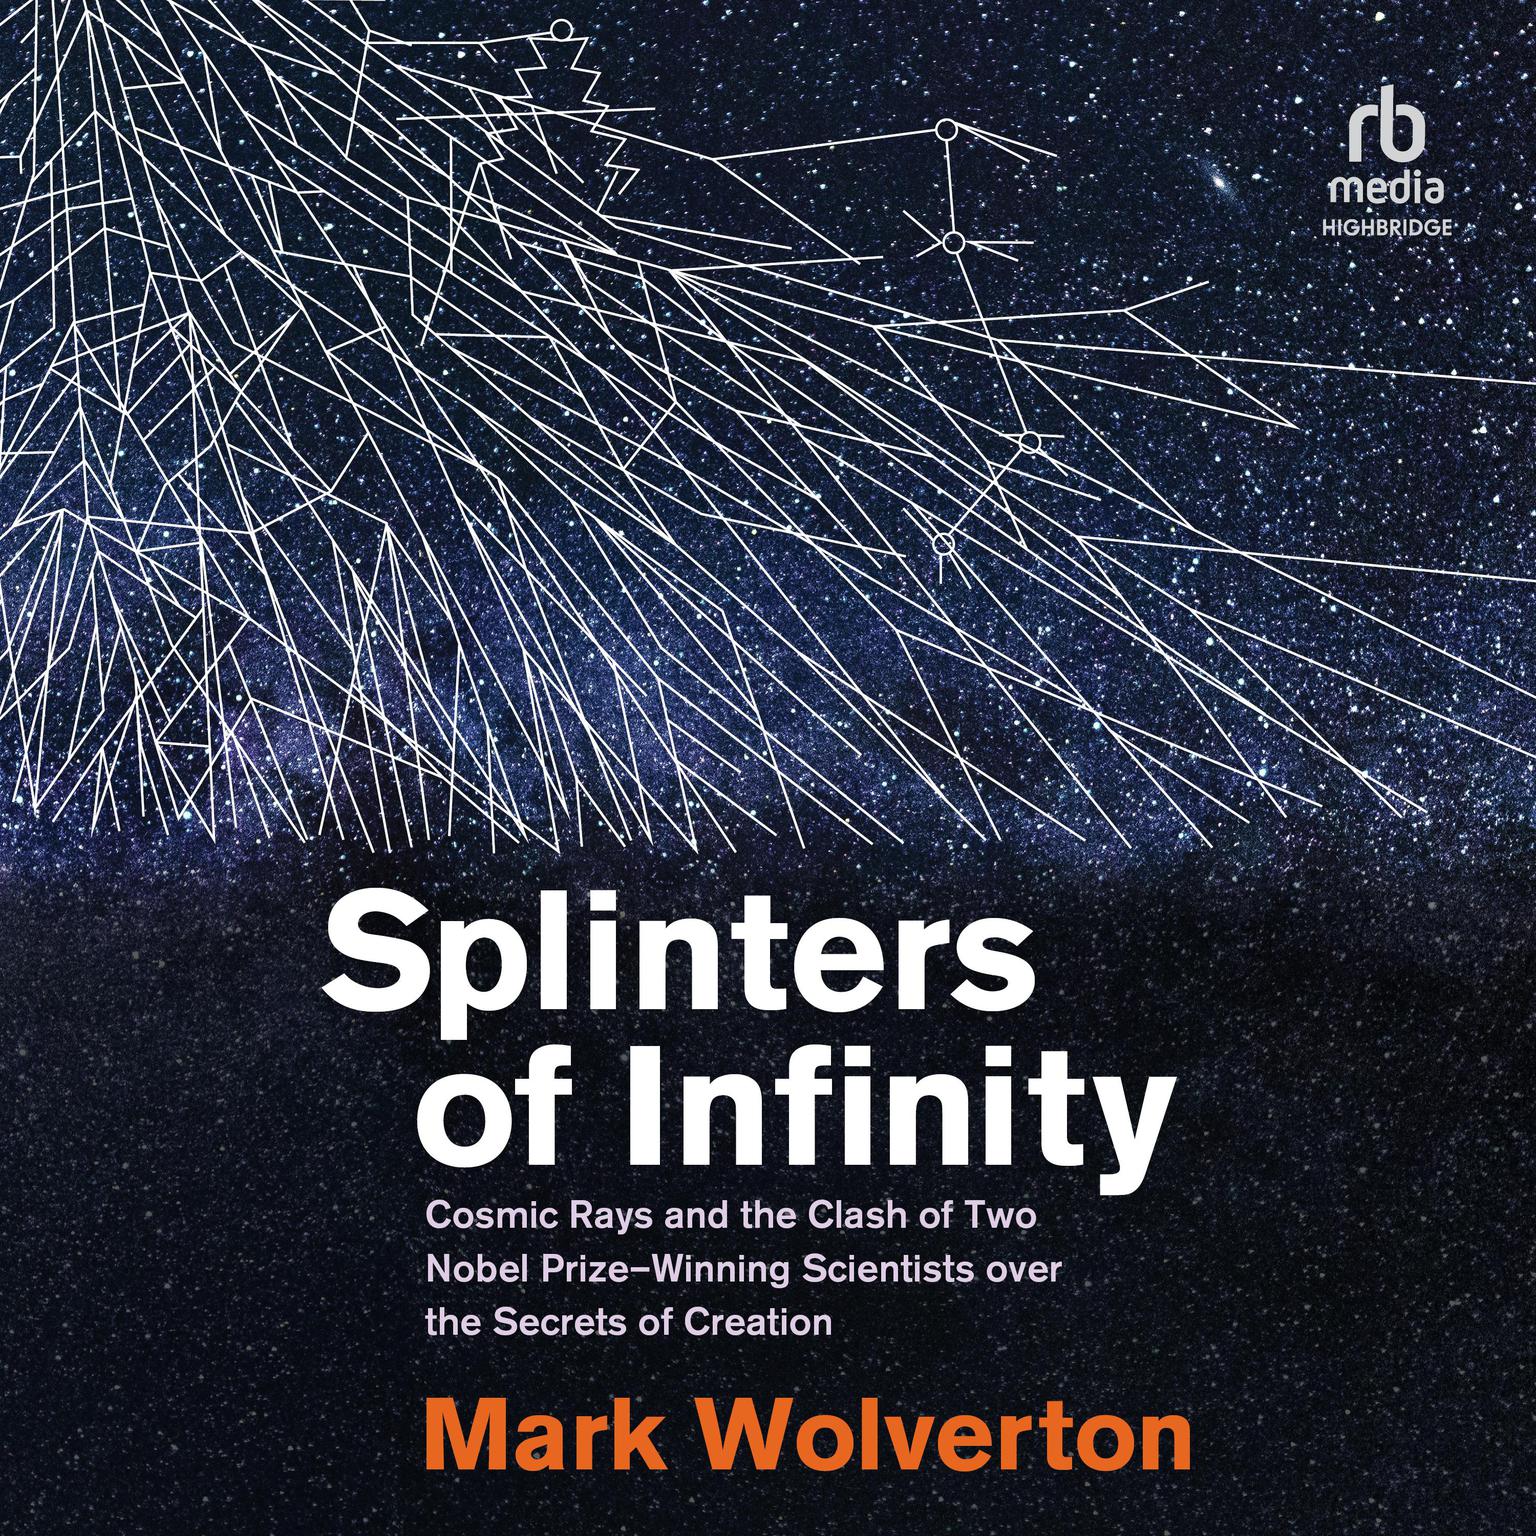 Splinters of Infinity: Cosmic Rays and the Clash of Two Nobel Prize-Winning Scientists over the Secrets of Creation Audiobook, by Mark Wolverton